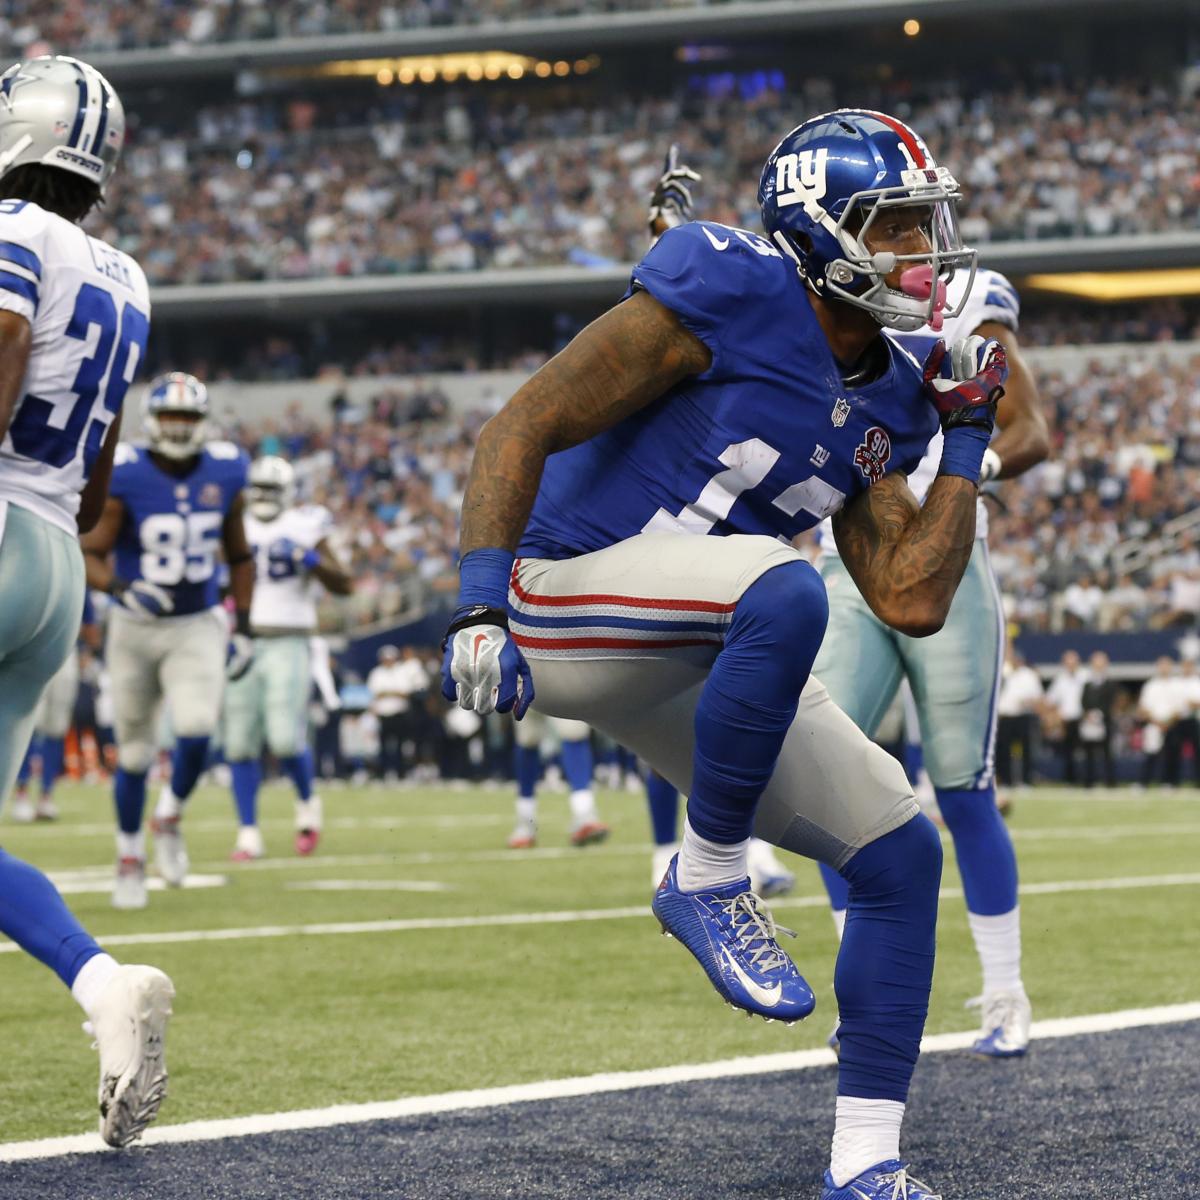 Giants vs. Cowboys: Players to watch in Week 1